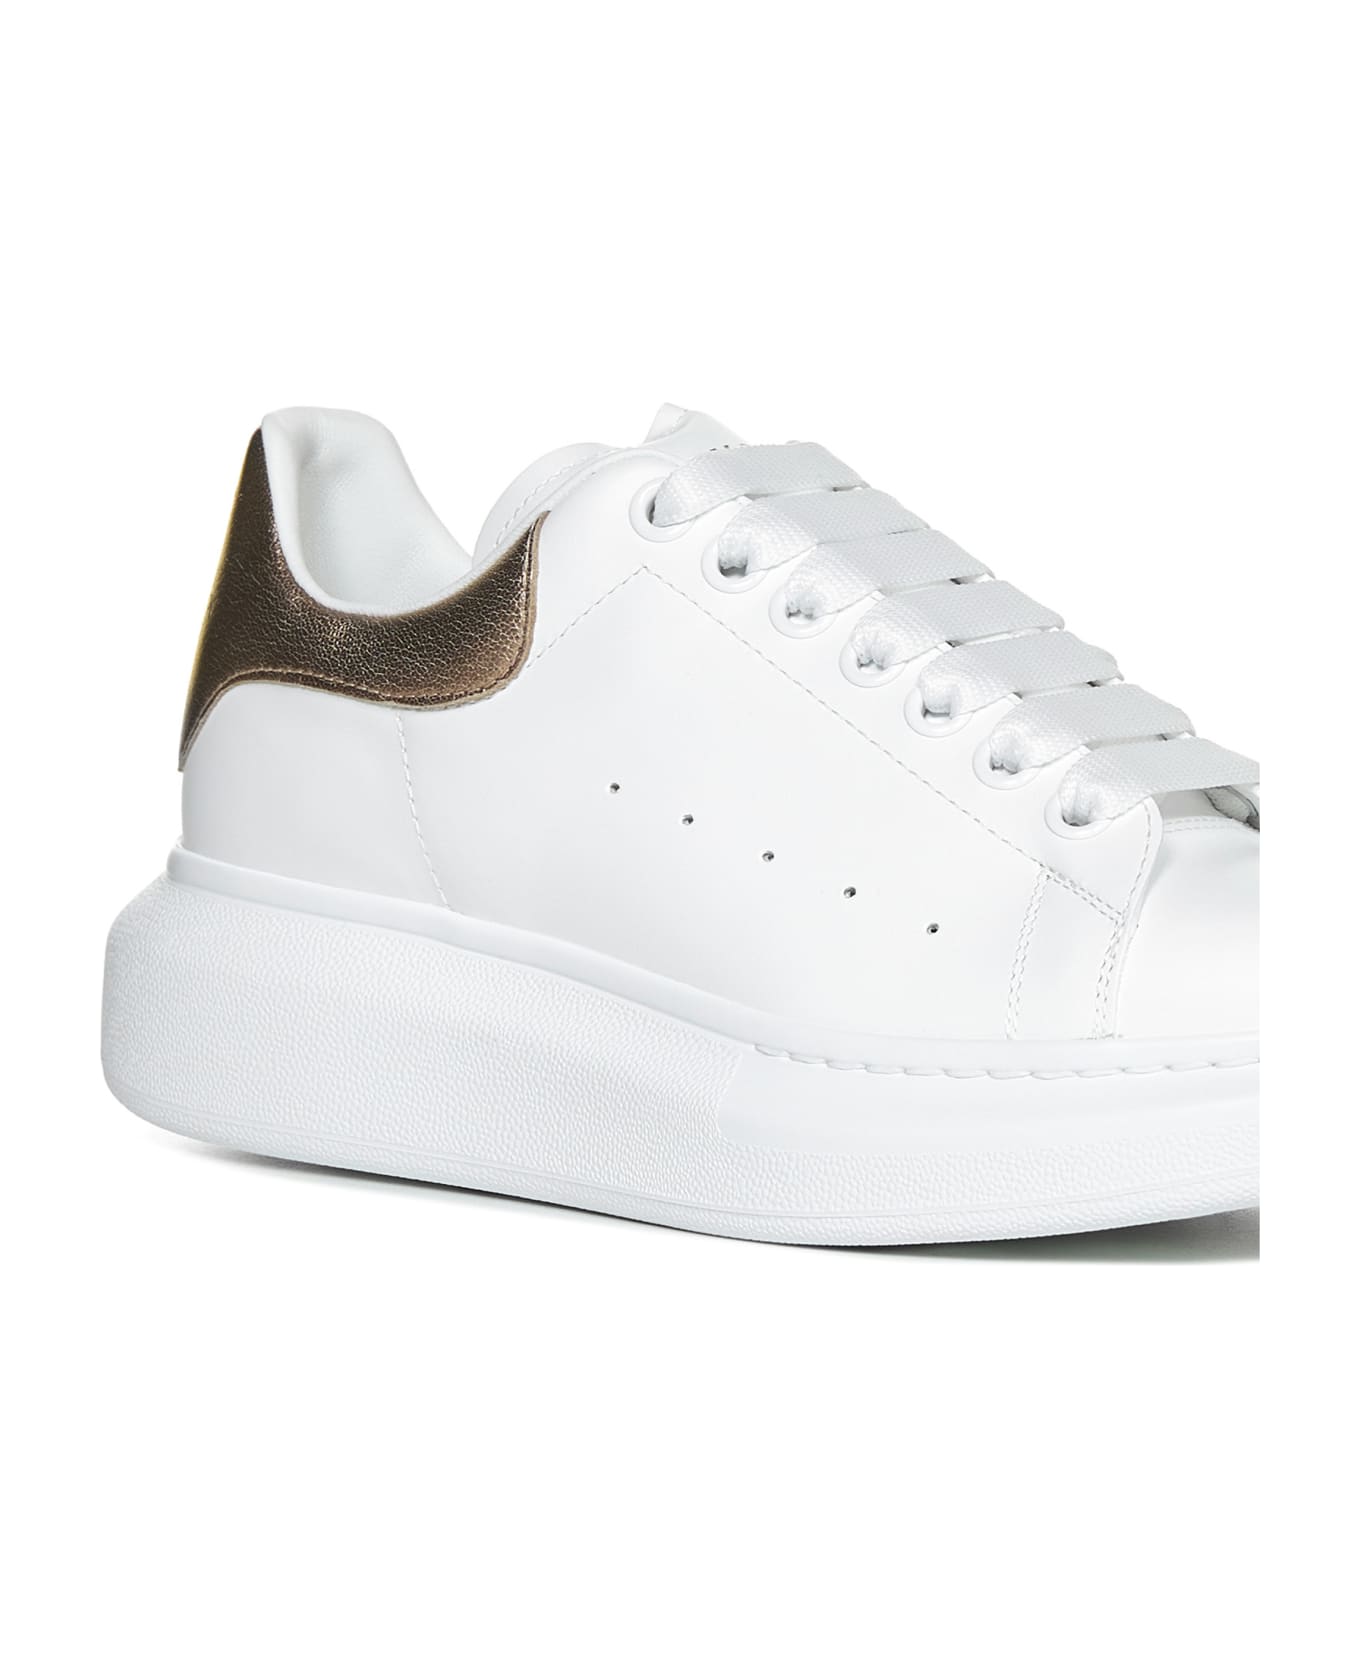 Alexander McQueen Oversized Leather Sneakers - White/rose Gold 171